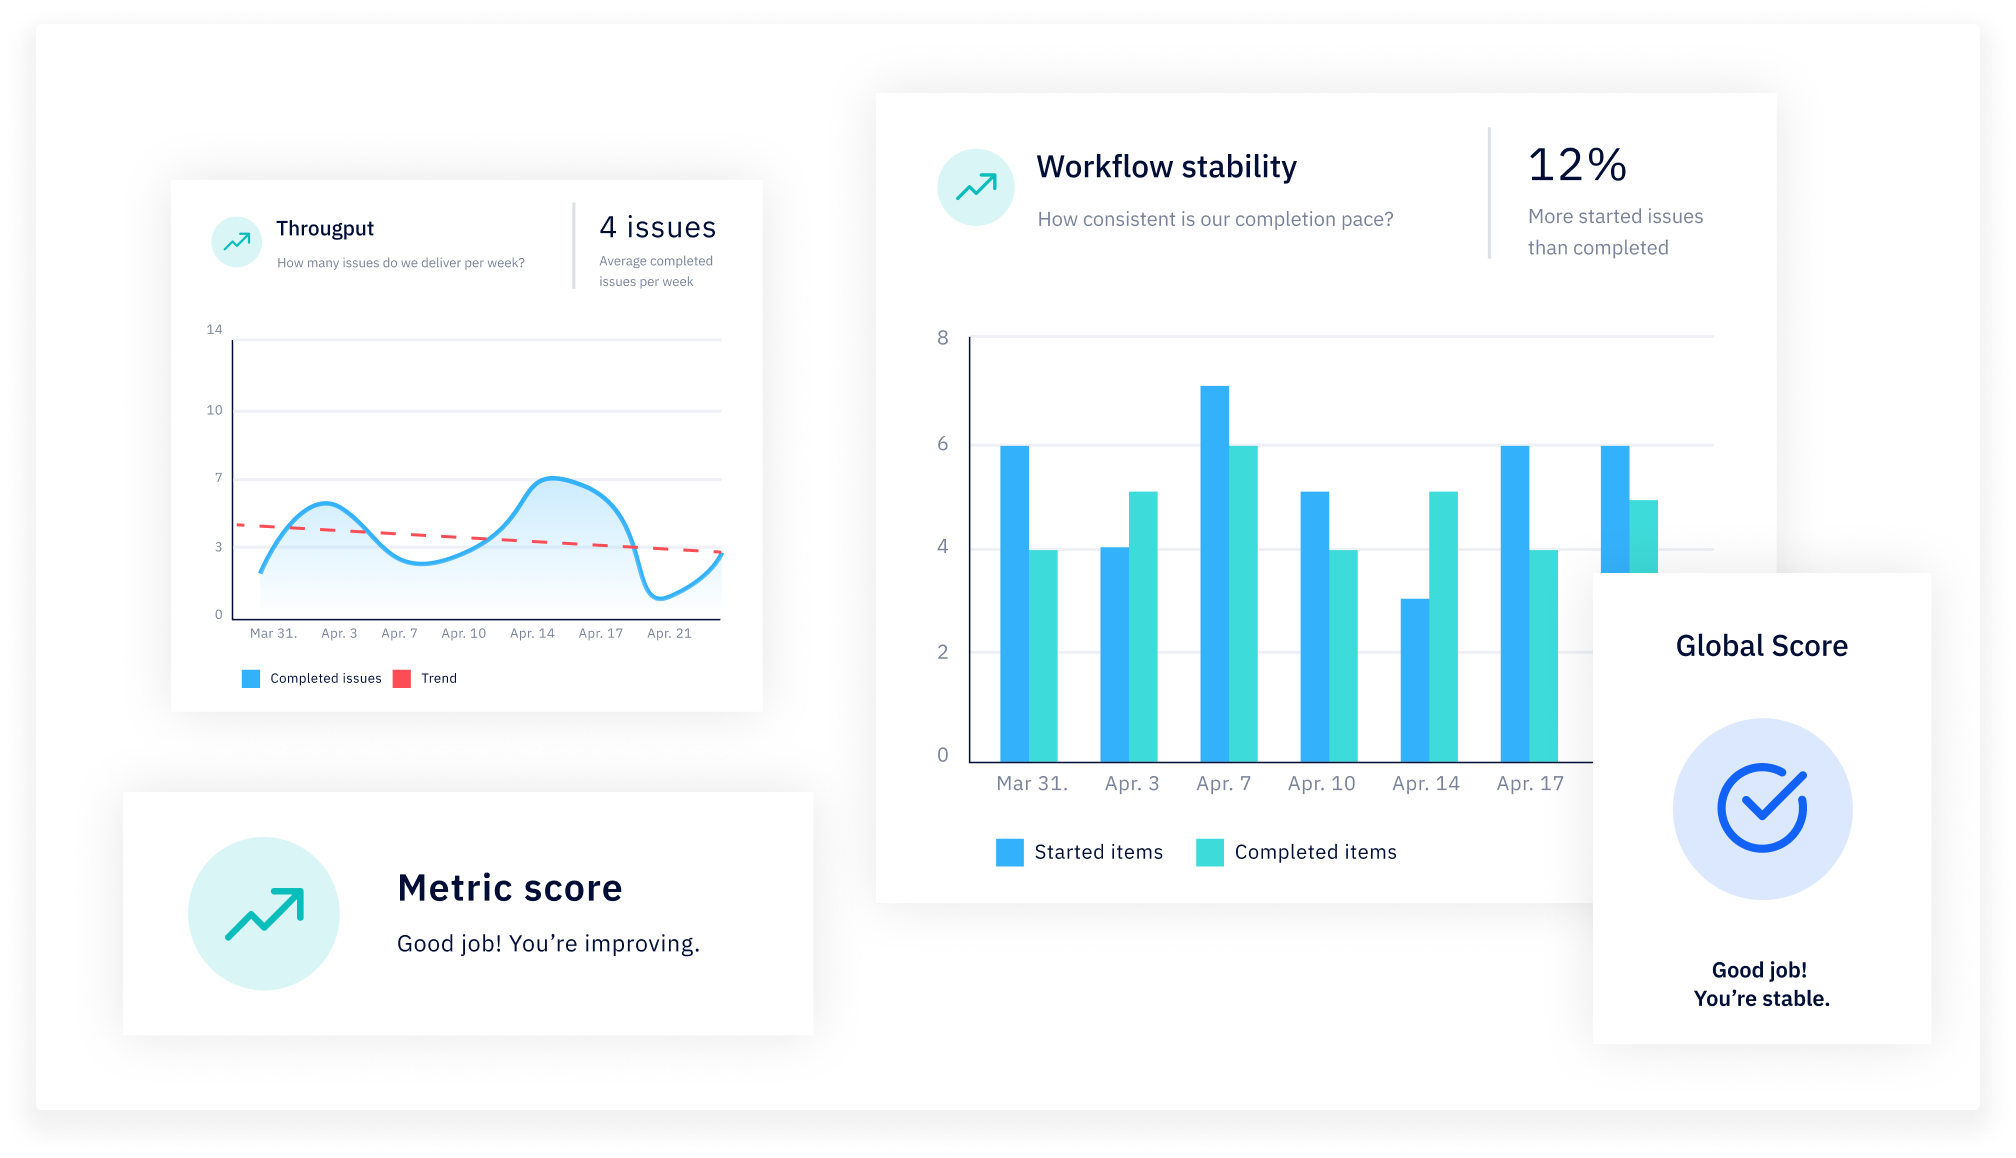 Get an overview of everything going on in the team with our easy-to-read dashboards. Since Axify collects data in real-time, you'll be able to address issues as they arise. Plus, we focus on team performance rather to foster true collaboration.